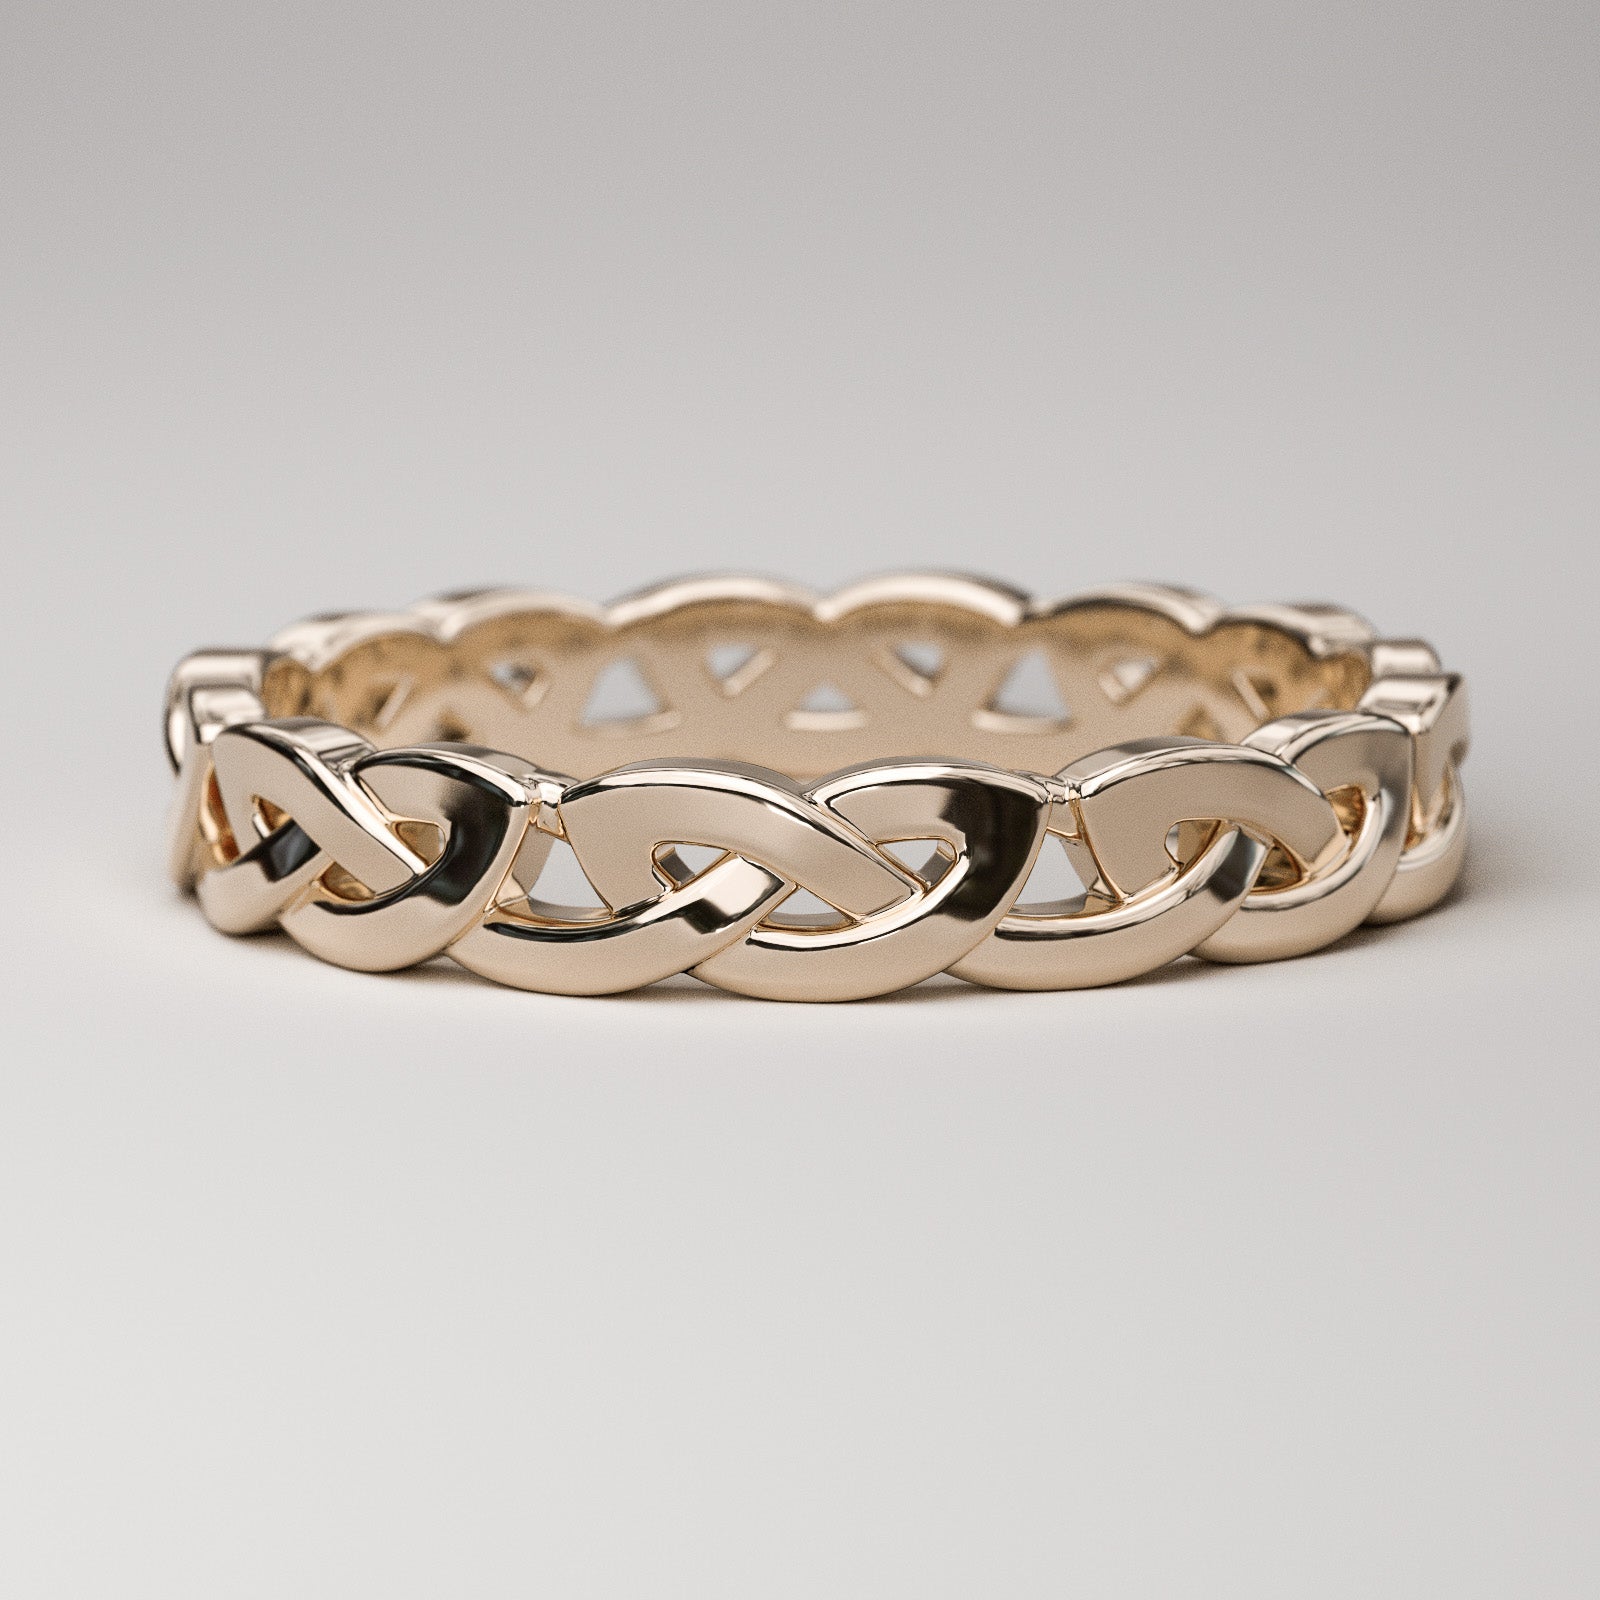 Unique 14k rose gold wedding band - simple knot Celtic eternity ring